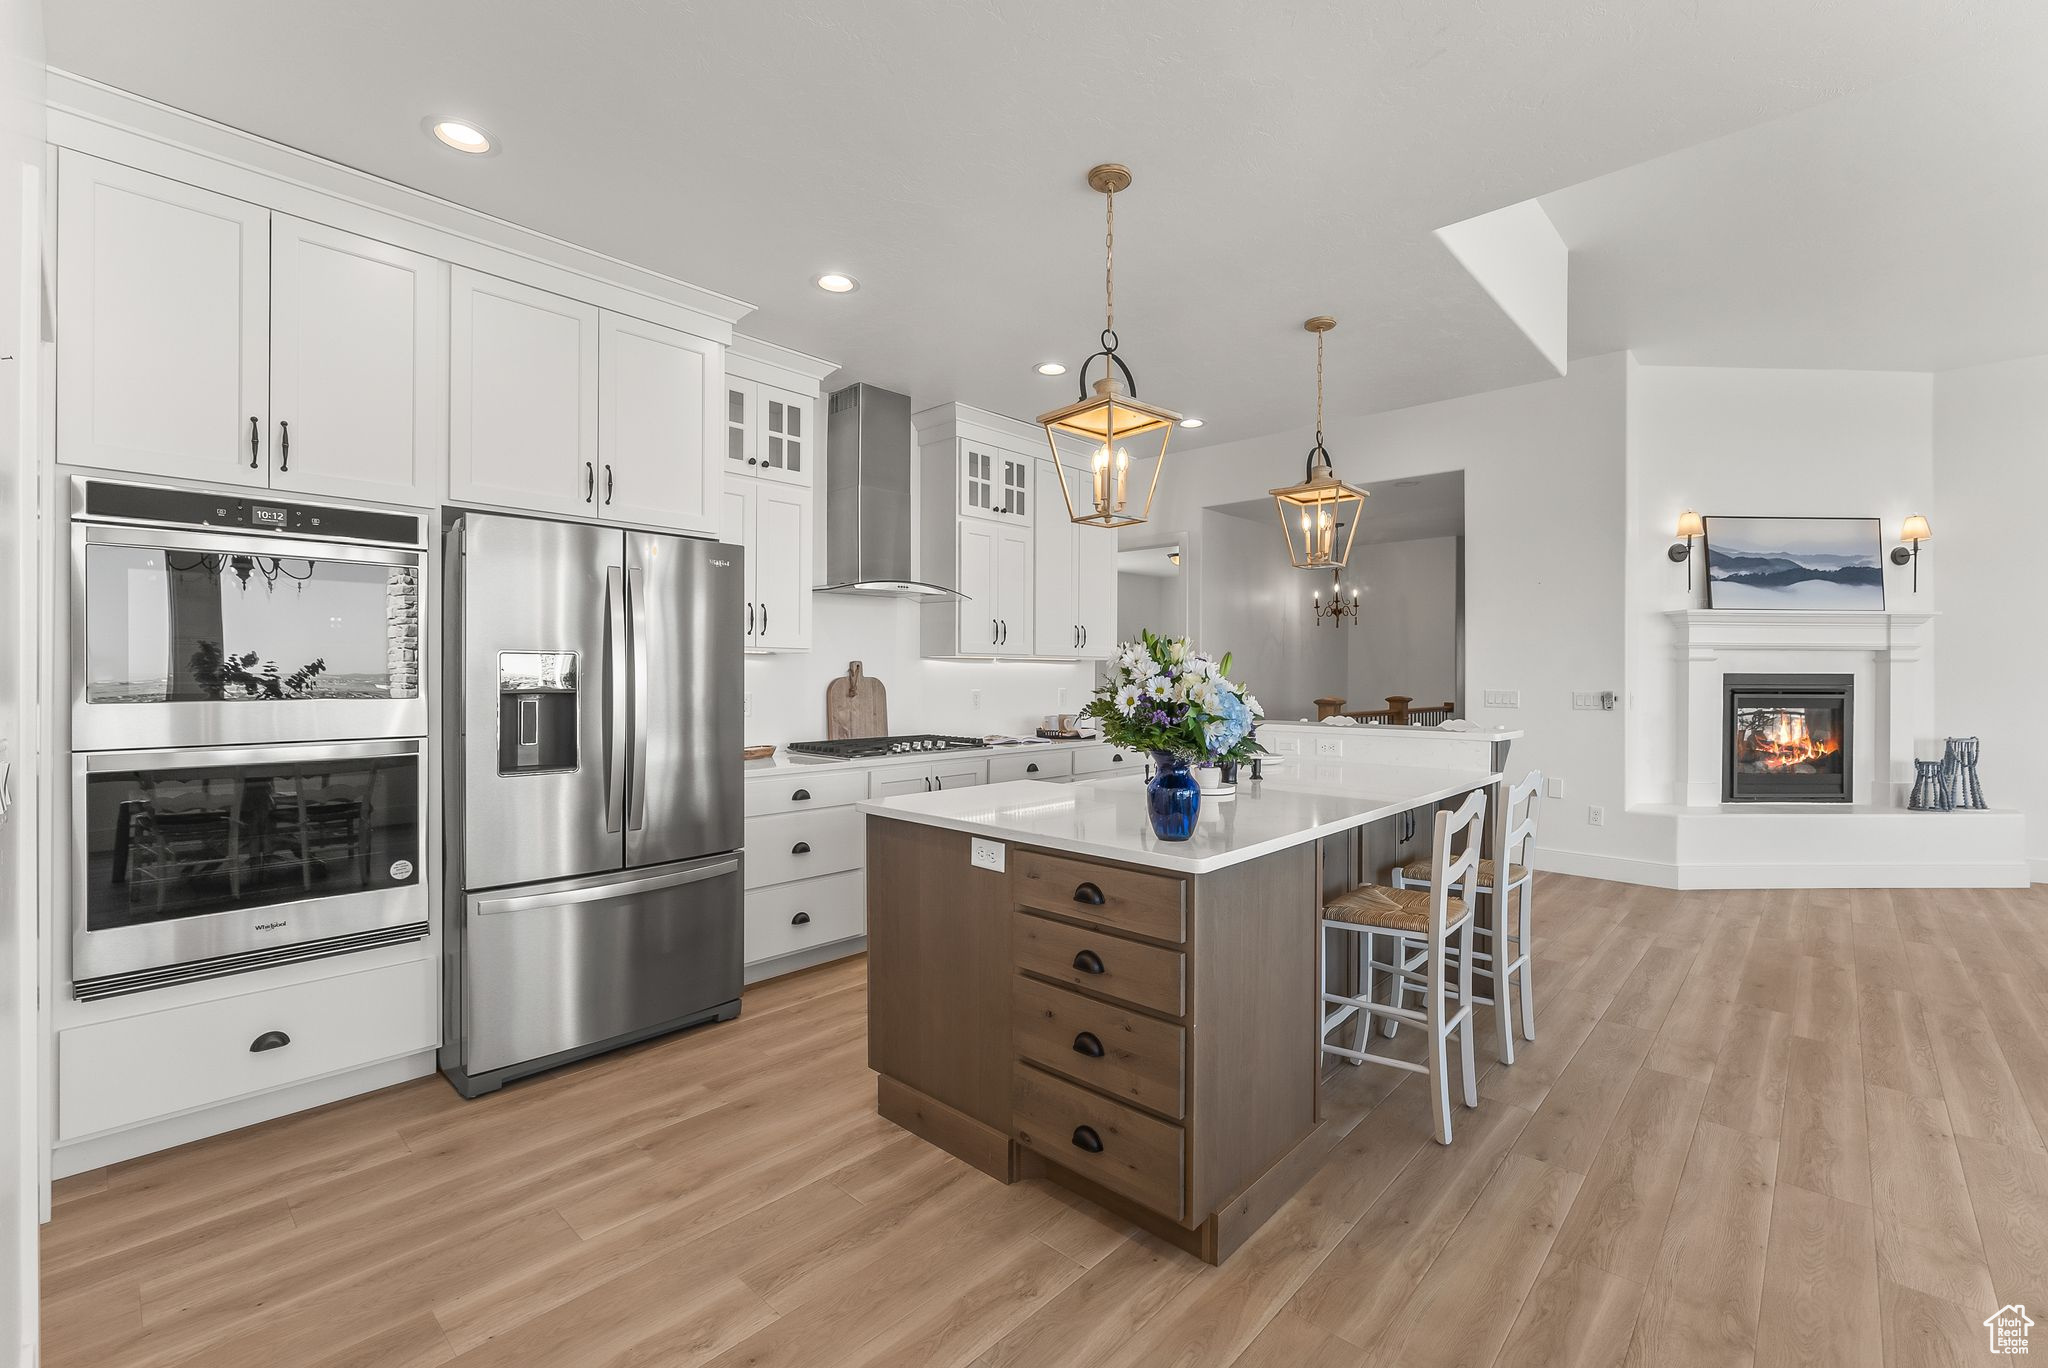 Kitchen with appliances with stainless steel finishes, white shaker cabinets, & a center island.